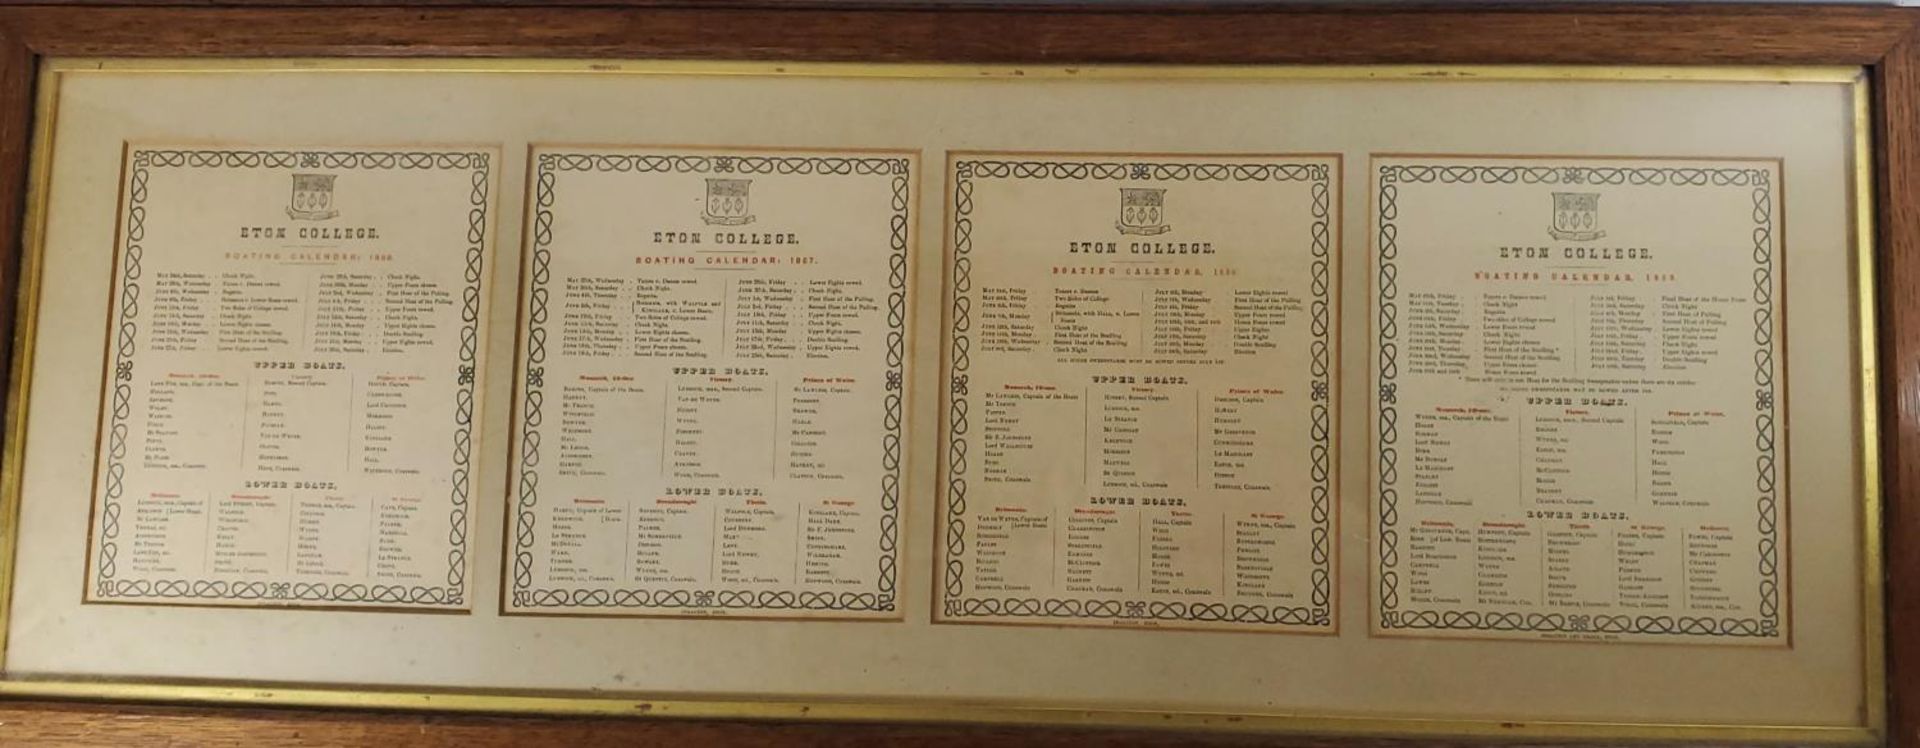 FOUR ETON COLLEGE BOATING CALENDARS FOR THE YEARS 1856, 1857, 1858 AND 1859, FRAMED